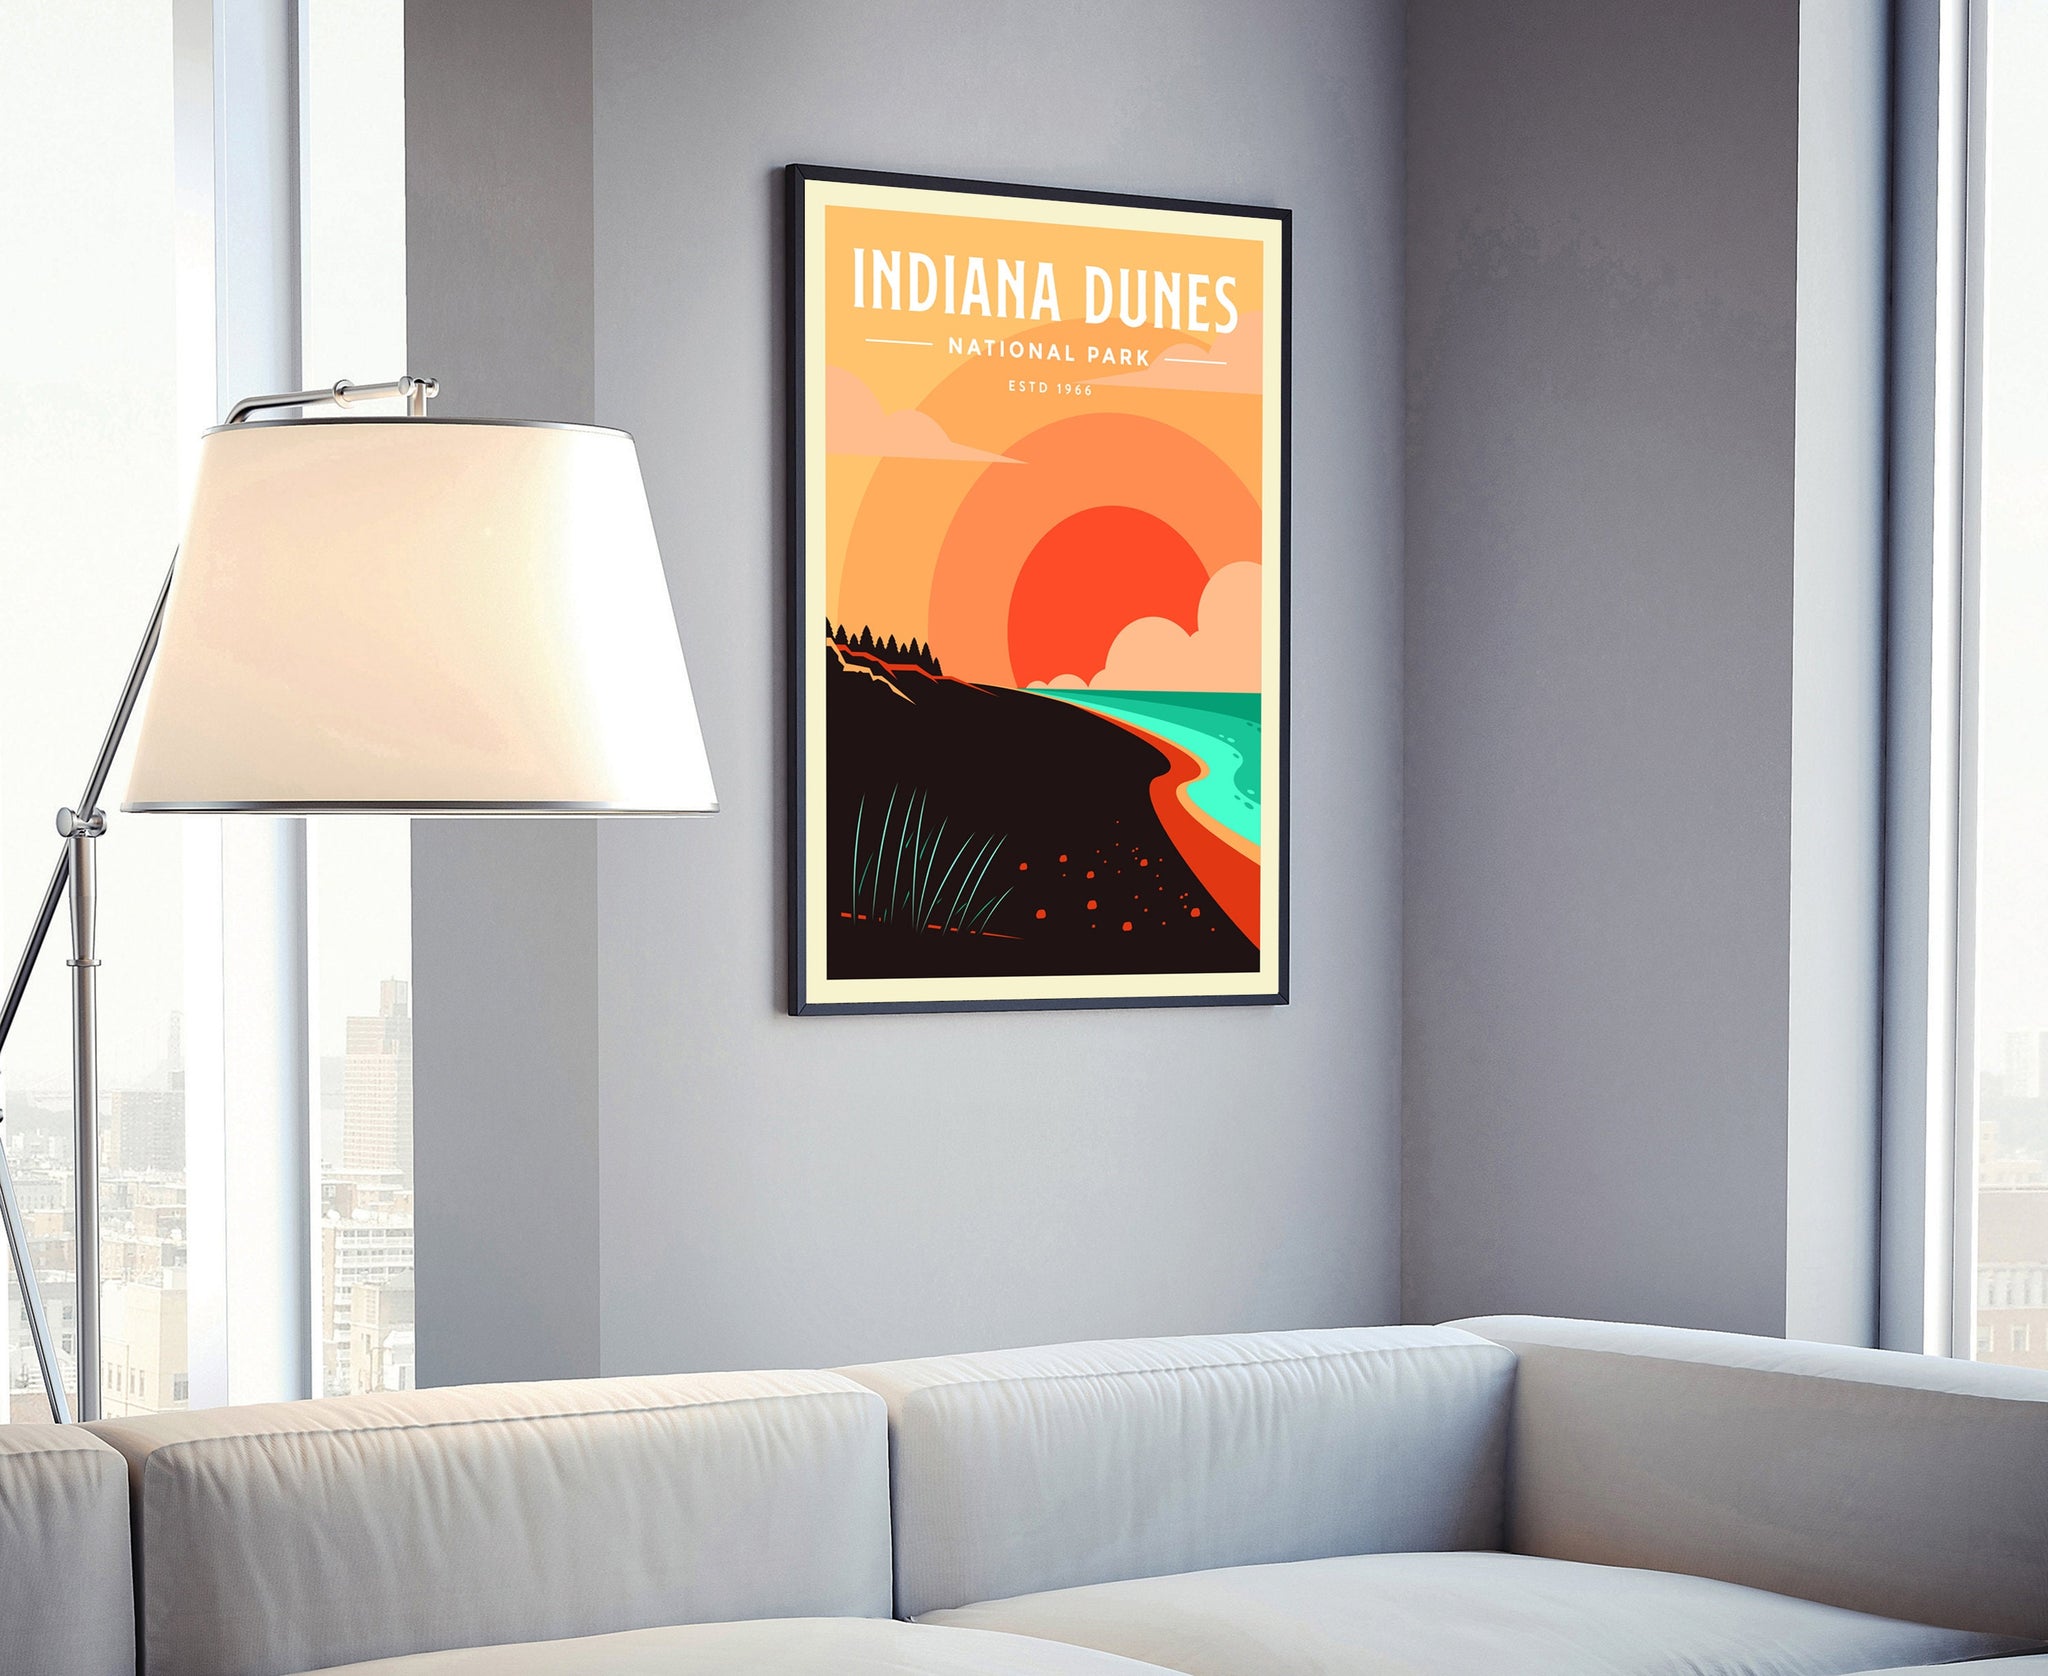 Indiana Dunes National Parks , Travel Poster Print, Retro Travel Poster, National Park in Indiana, Housewarming Gift, Office Wall Art